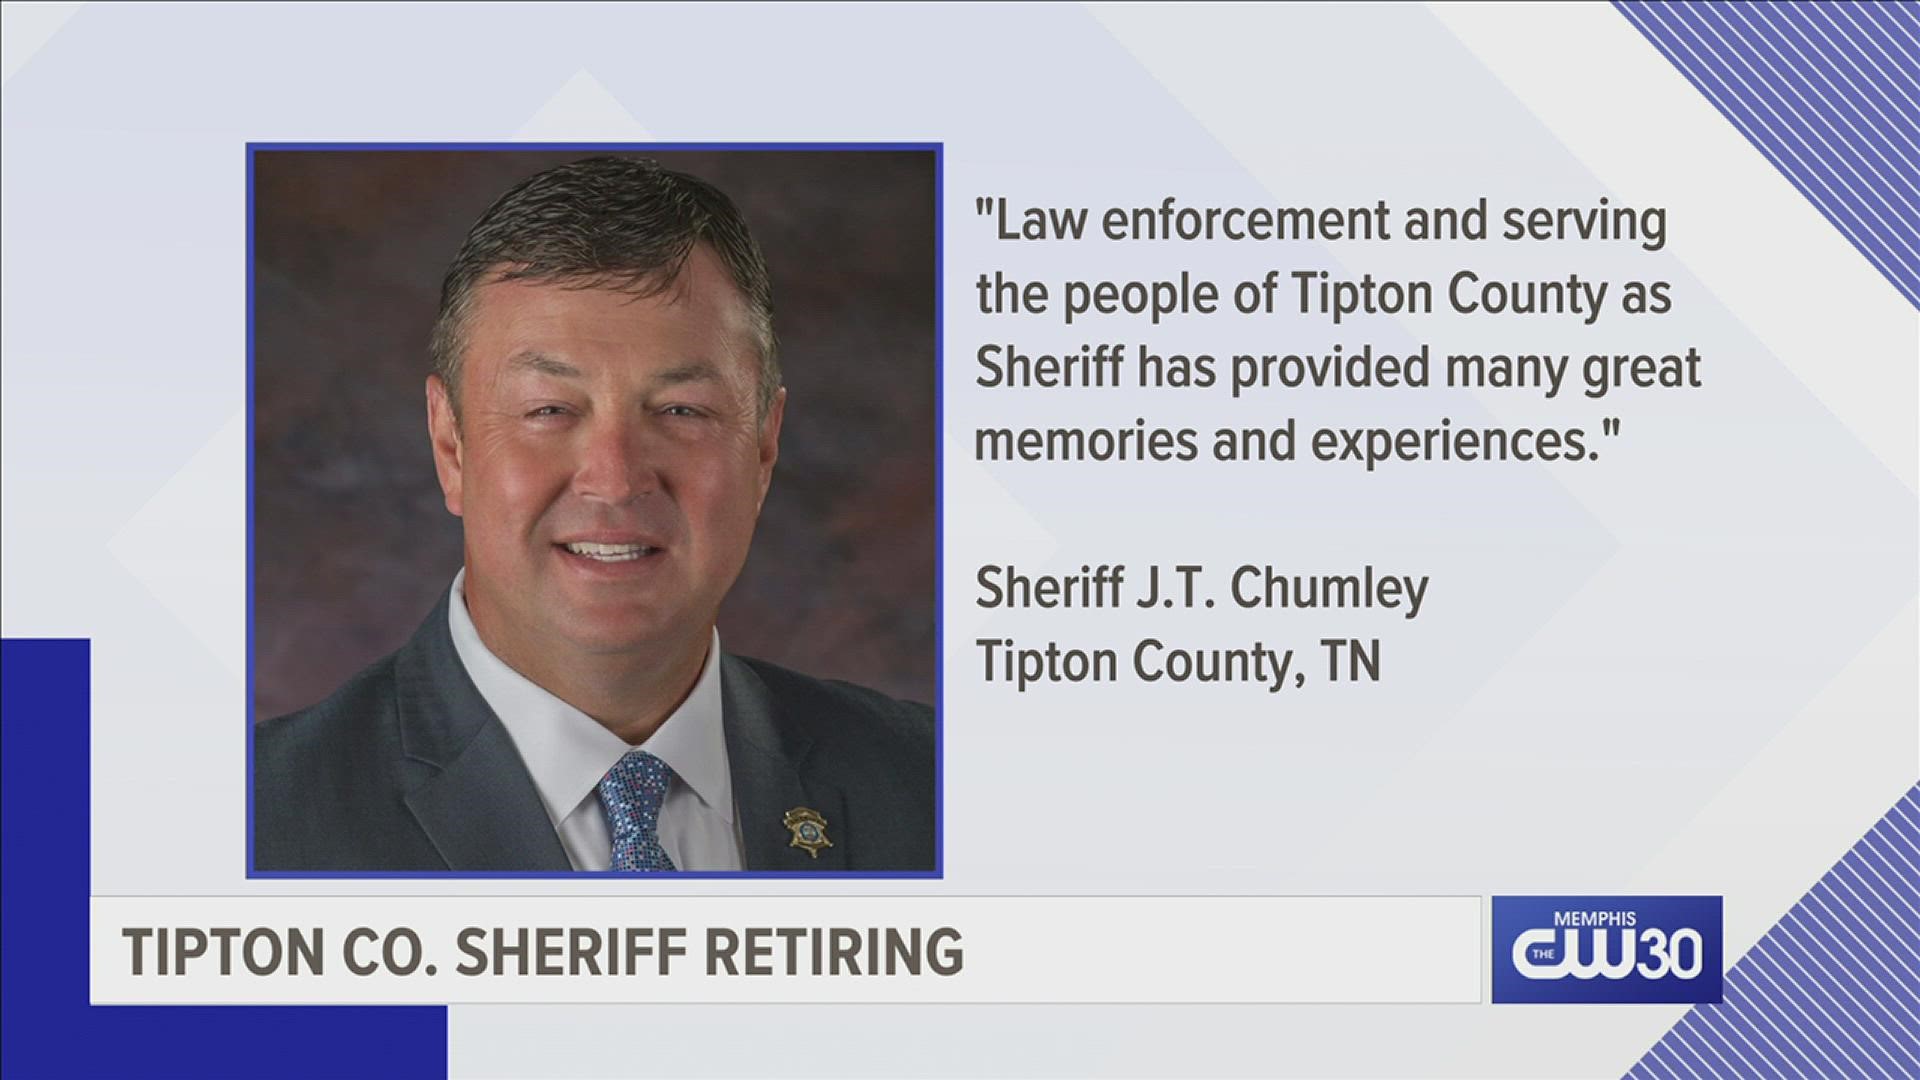 After more than 30 years in law enforcement, a Mid-South sheriff announces his retirement.